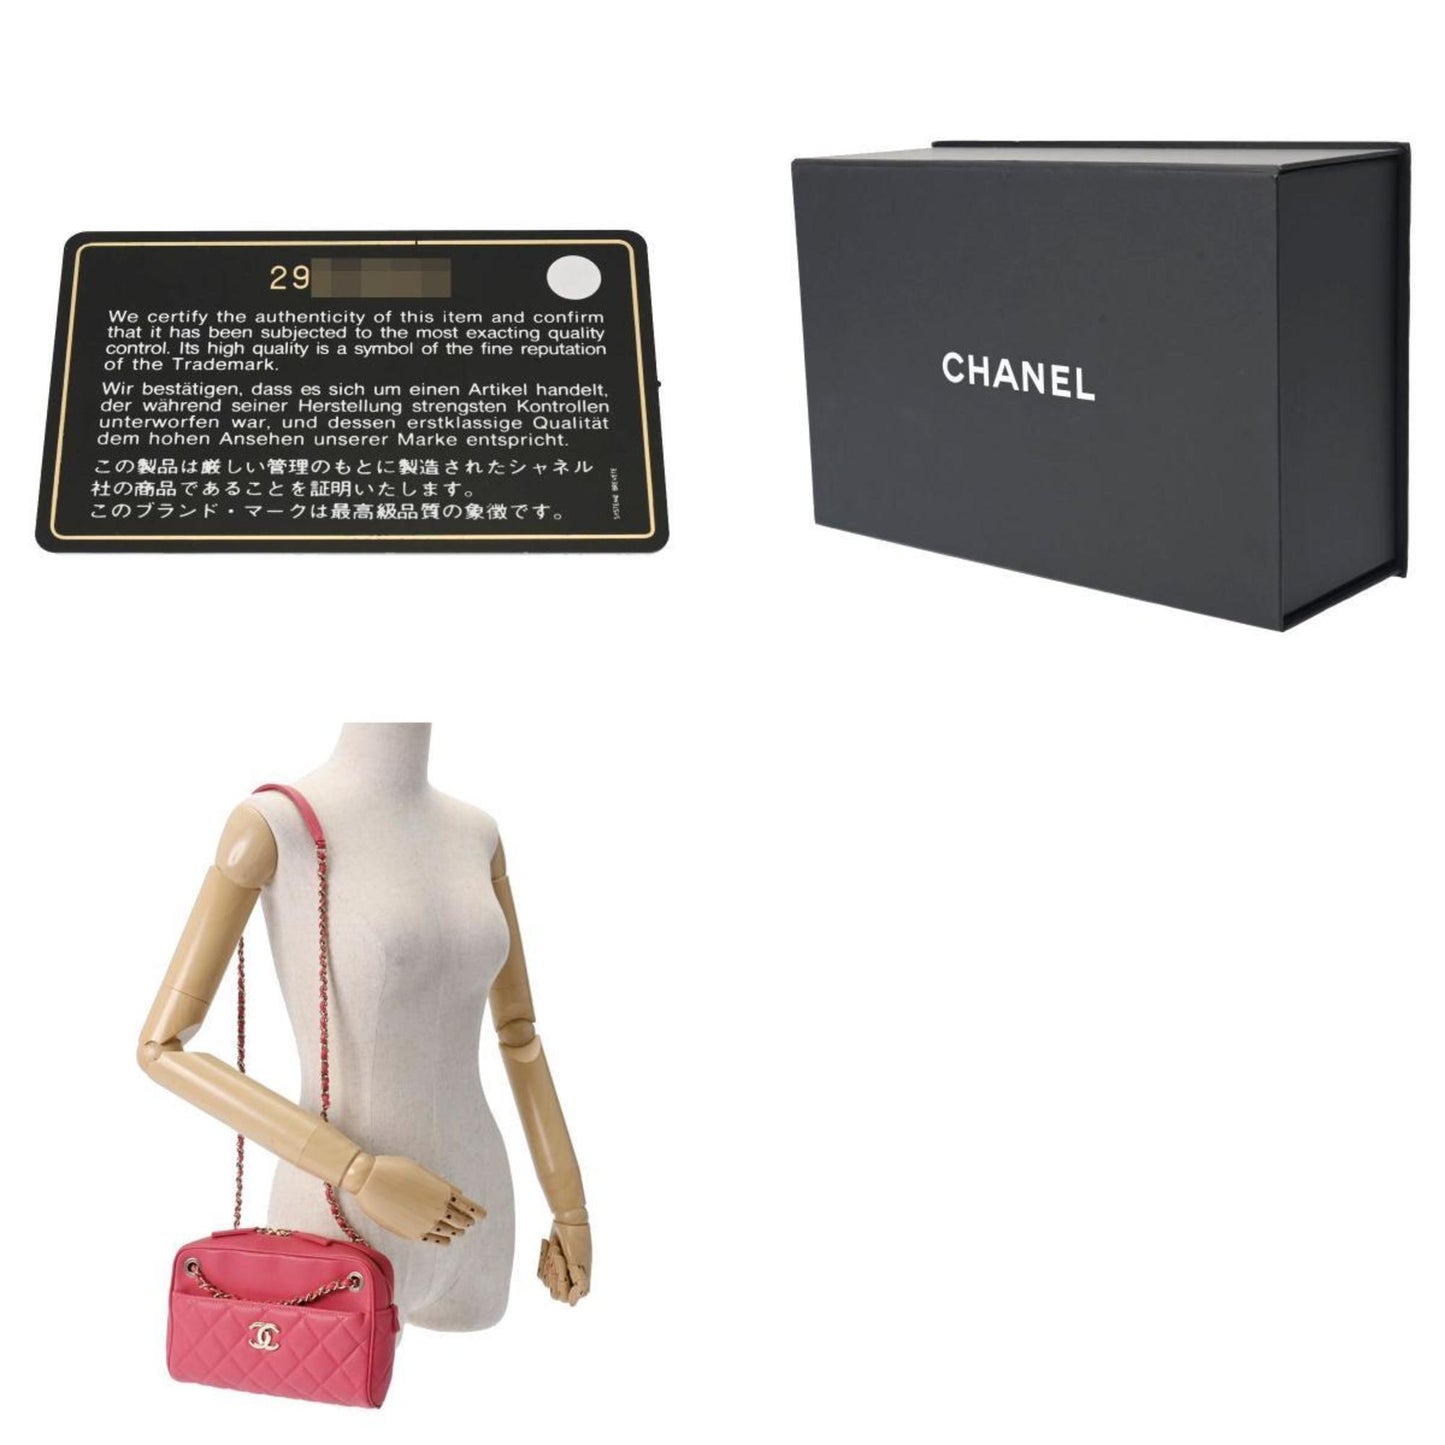 Chanel Women's Champagne Gold Caviar Leather Shoulder Bag in Pink